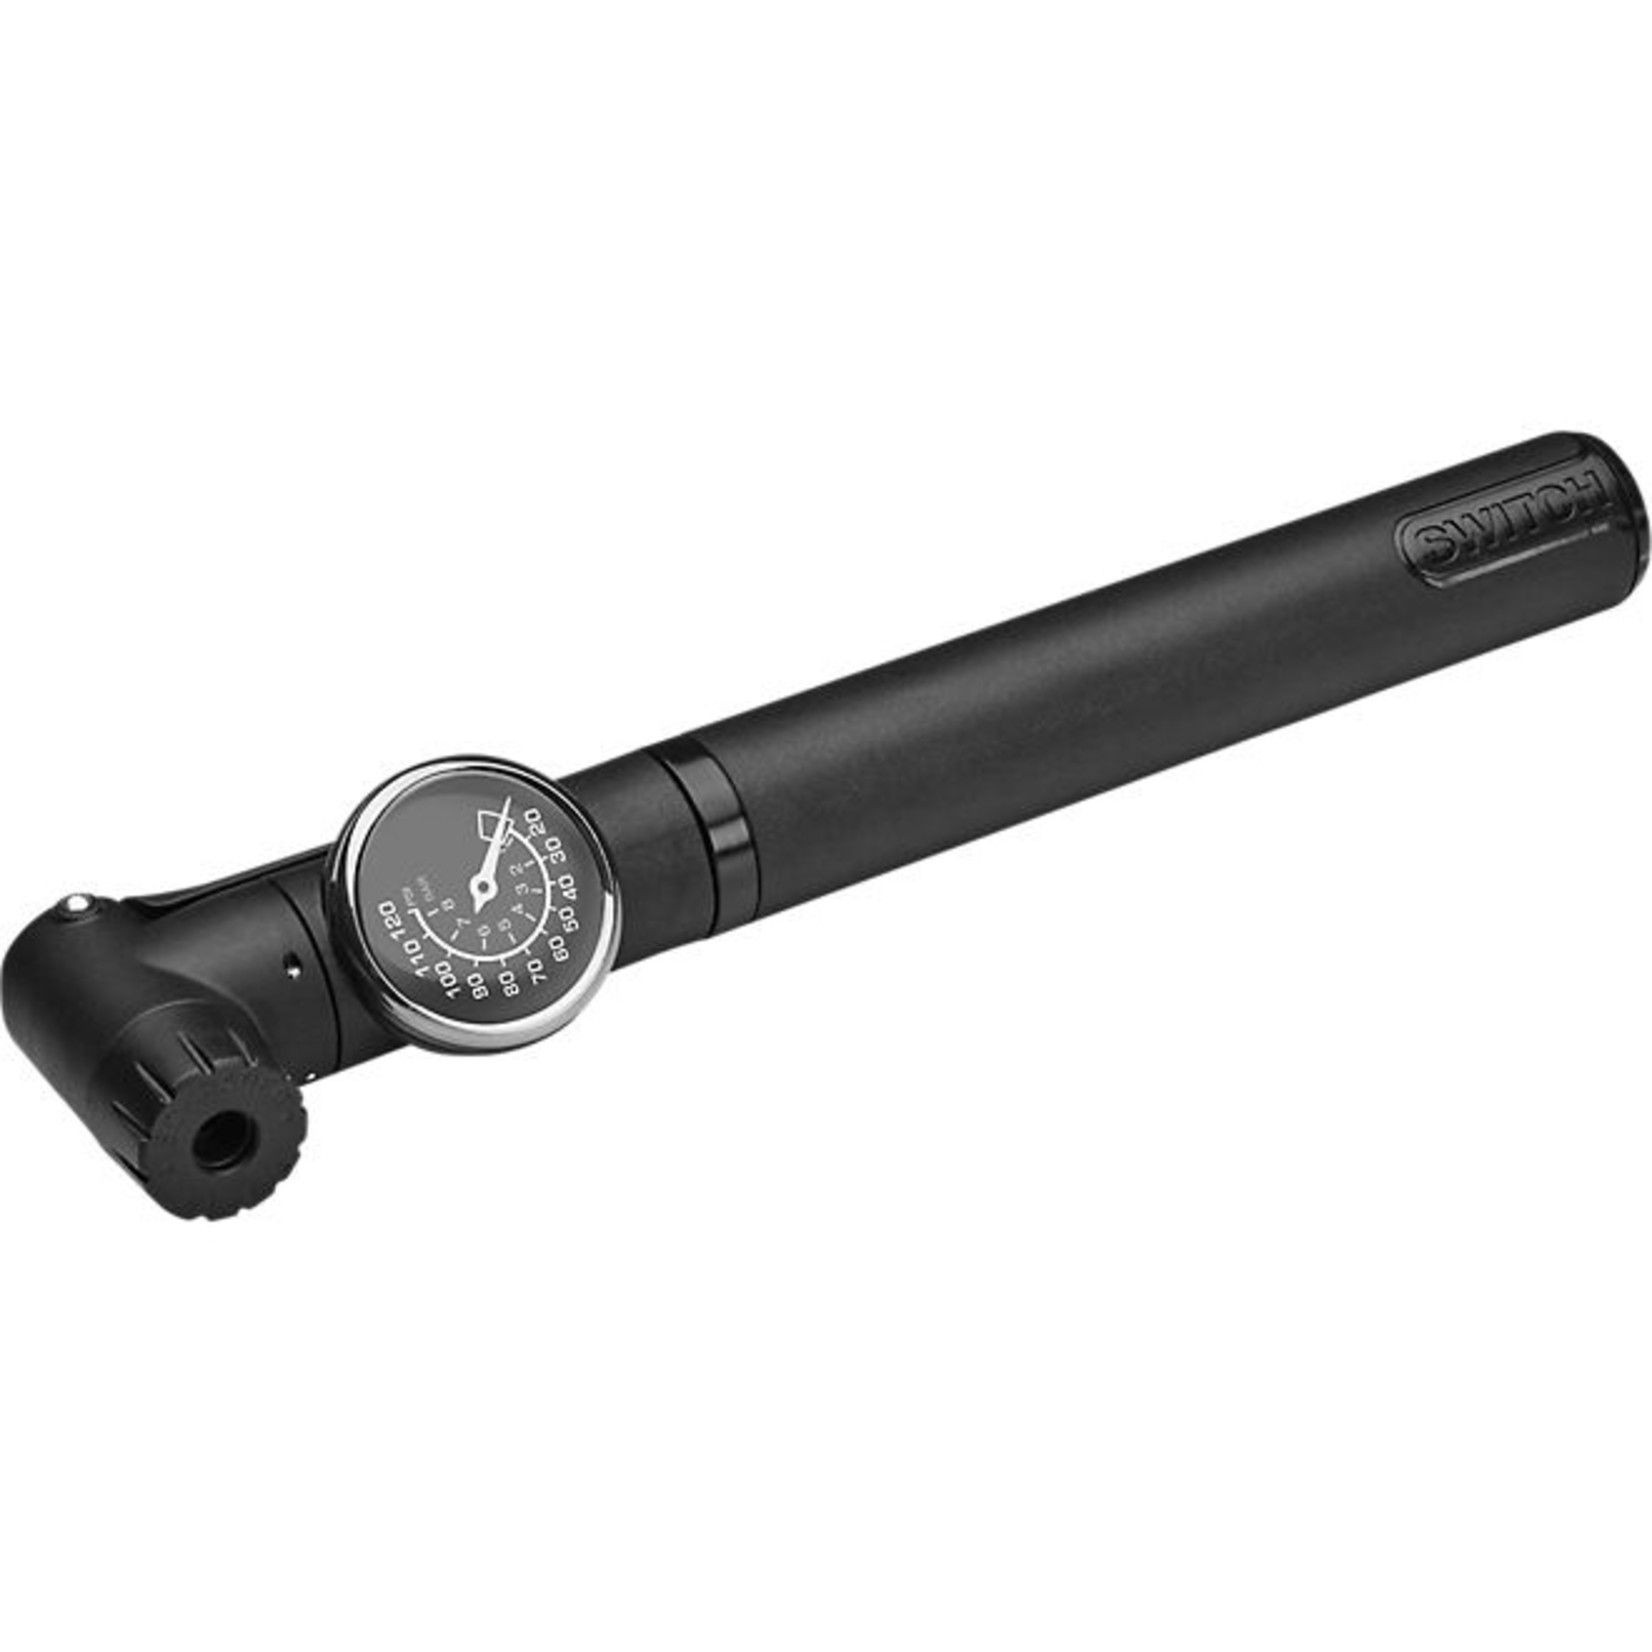 Specialized Air Tool Switch Comp Pump in Black